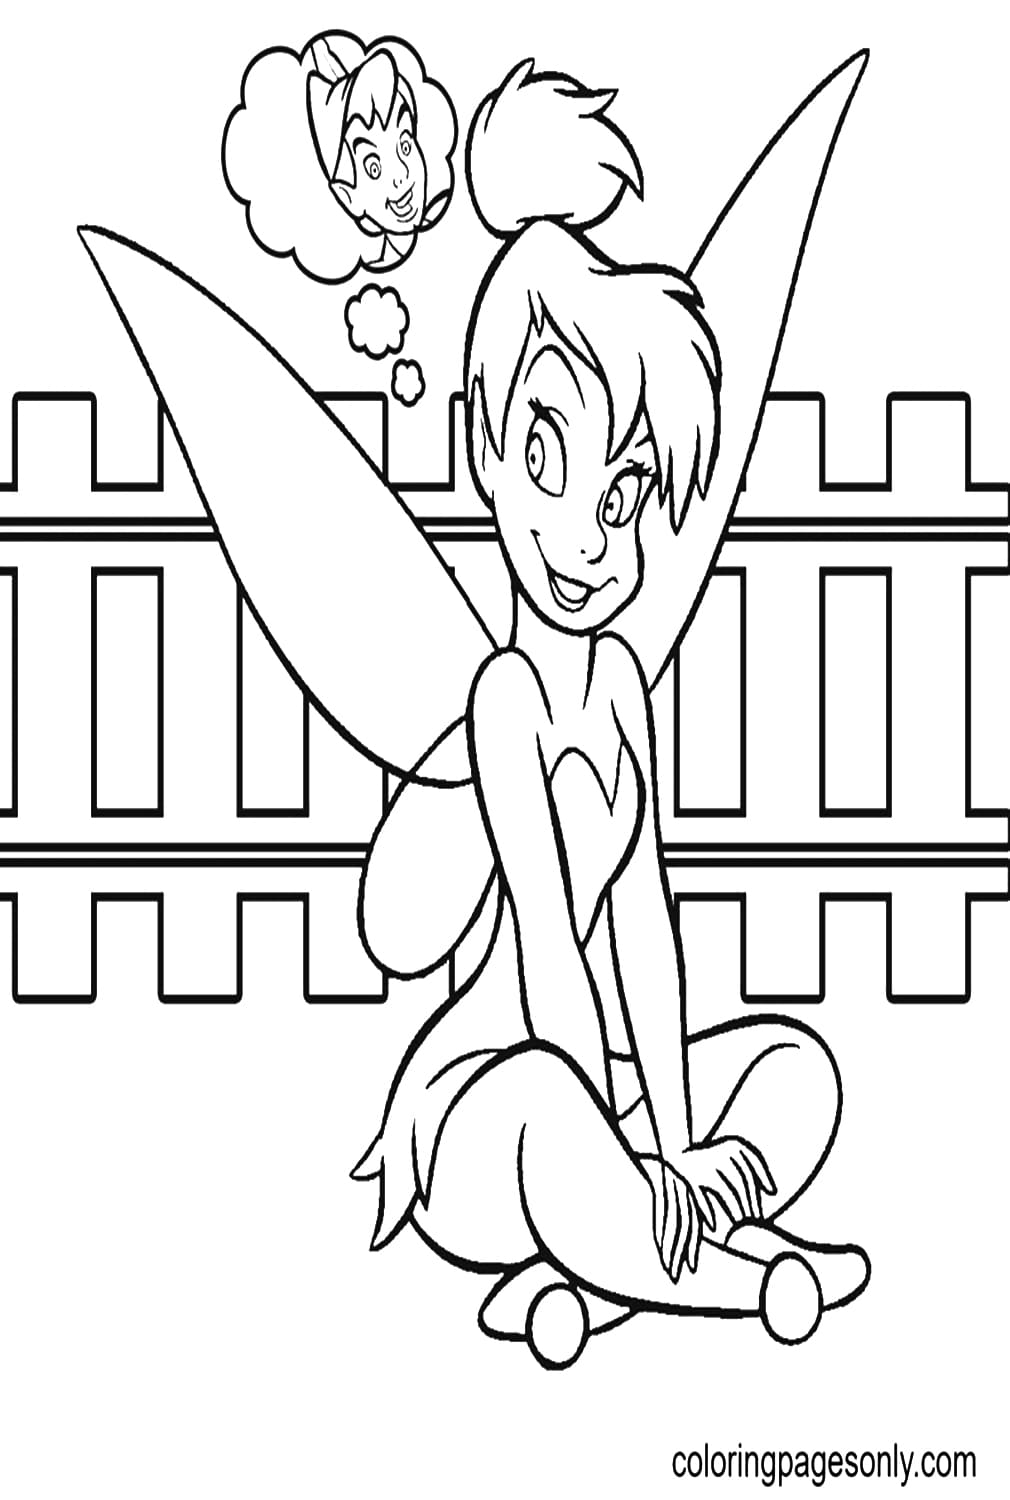 Tinkerbell Thinks About Peter Pan Coloring Page